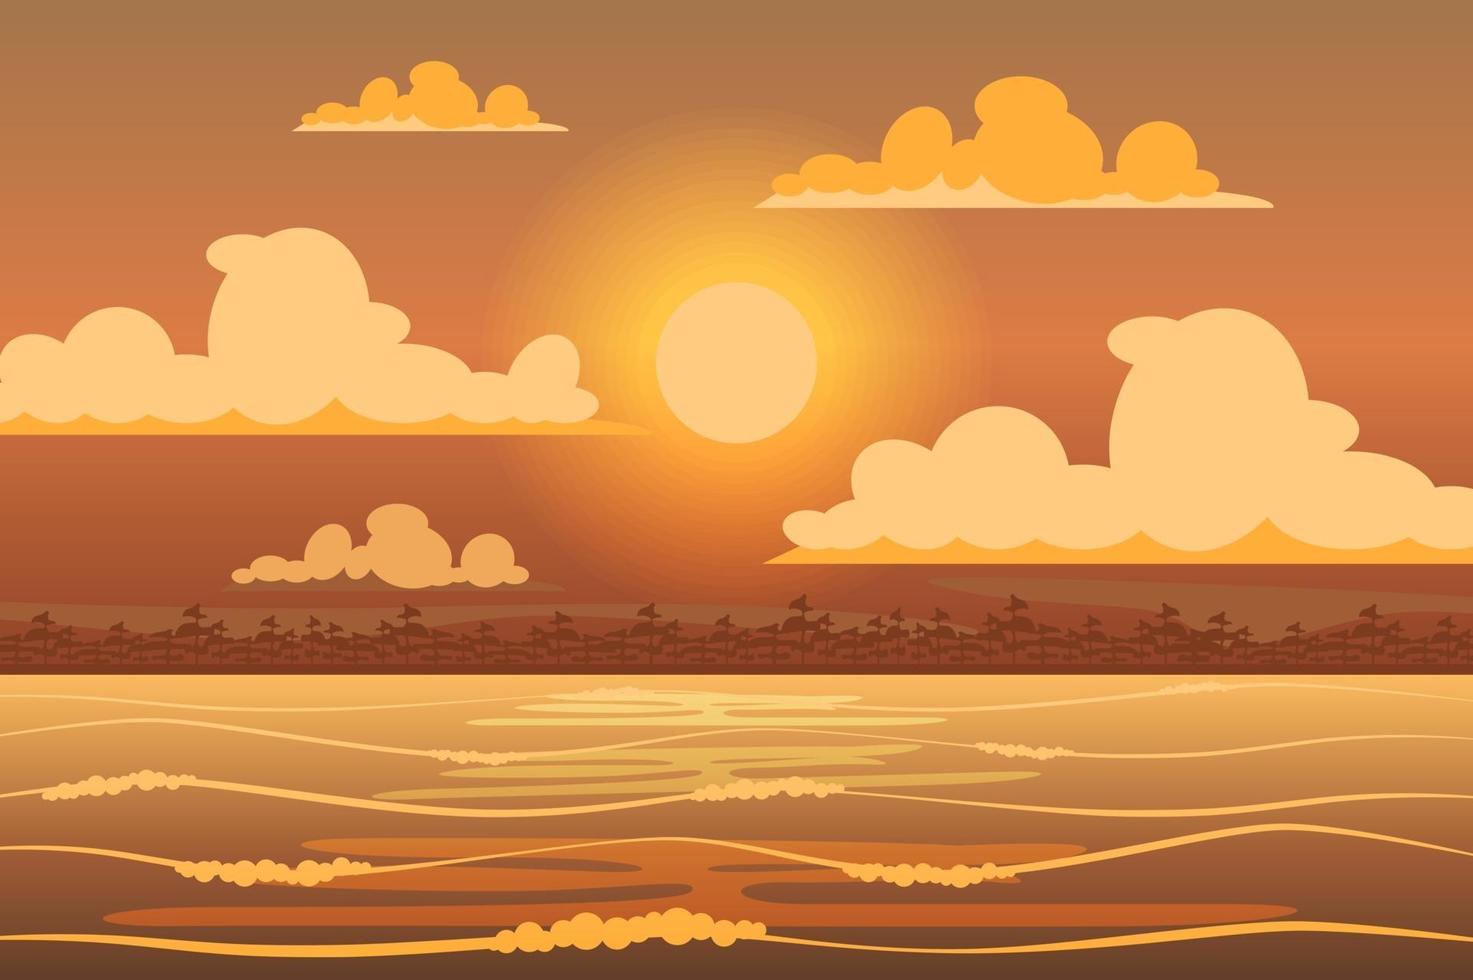 Sun shining over tropical island landscape background in flat style vector